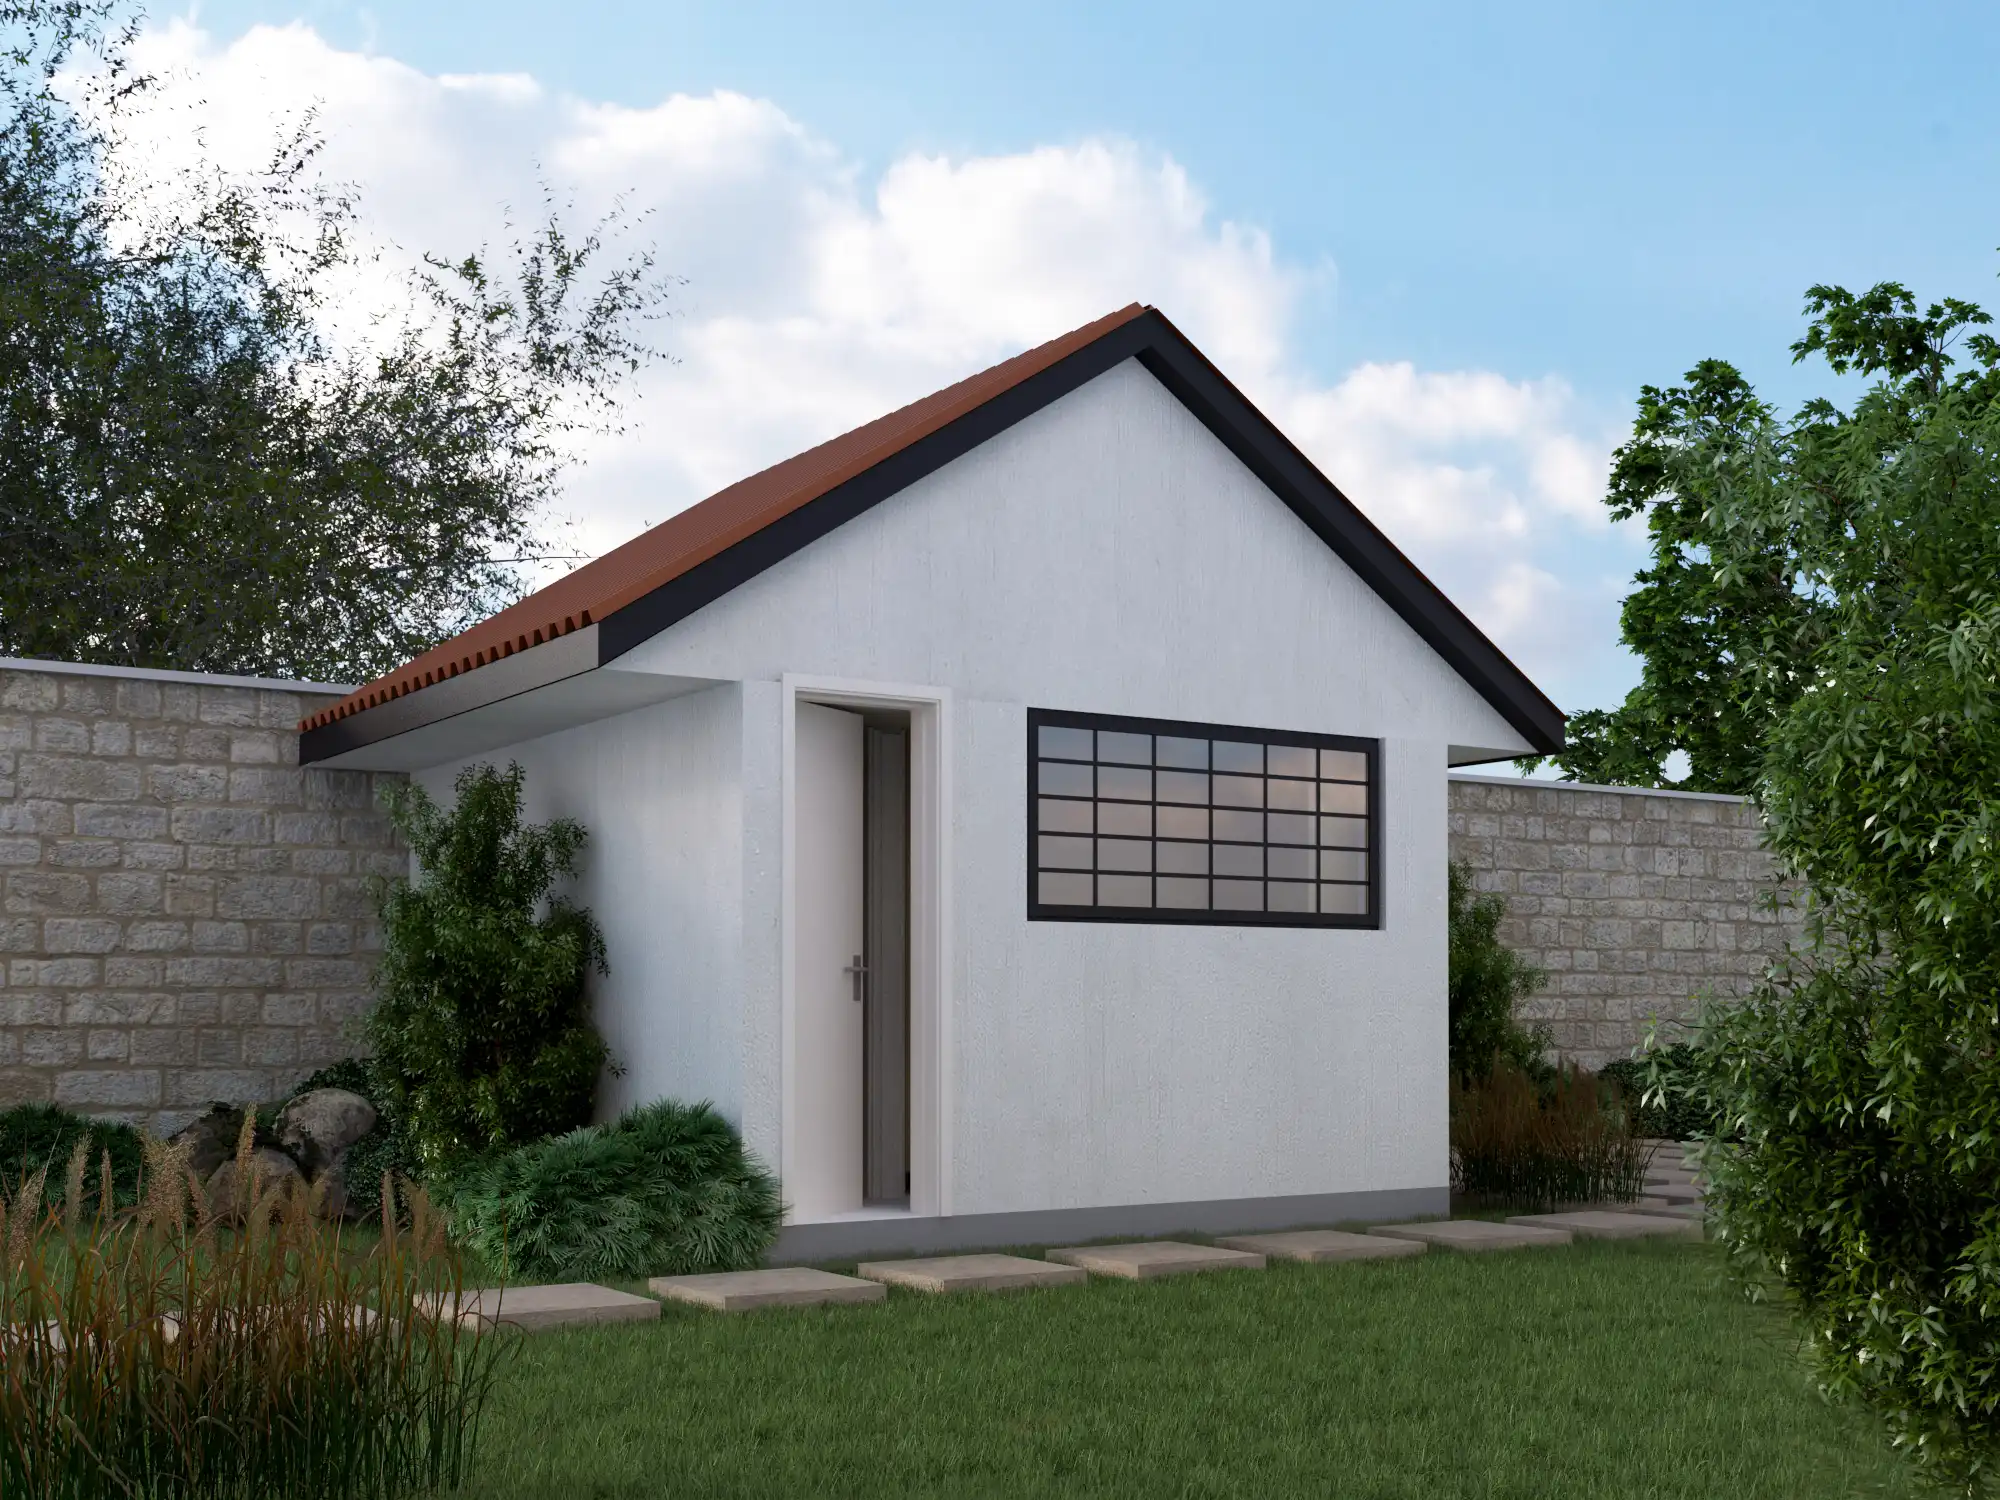 Home Office - Home office from Inuua Tujenge house plans with 0 bedrooms and 0 bathrooms. ( module )